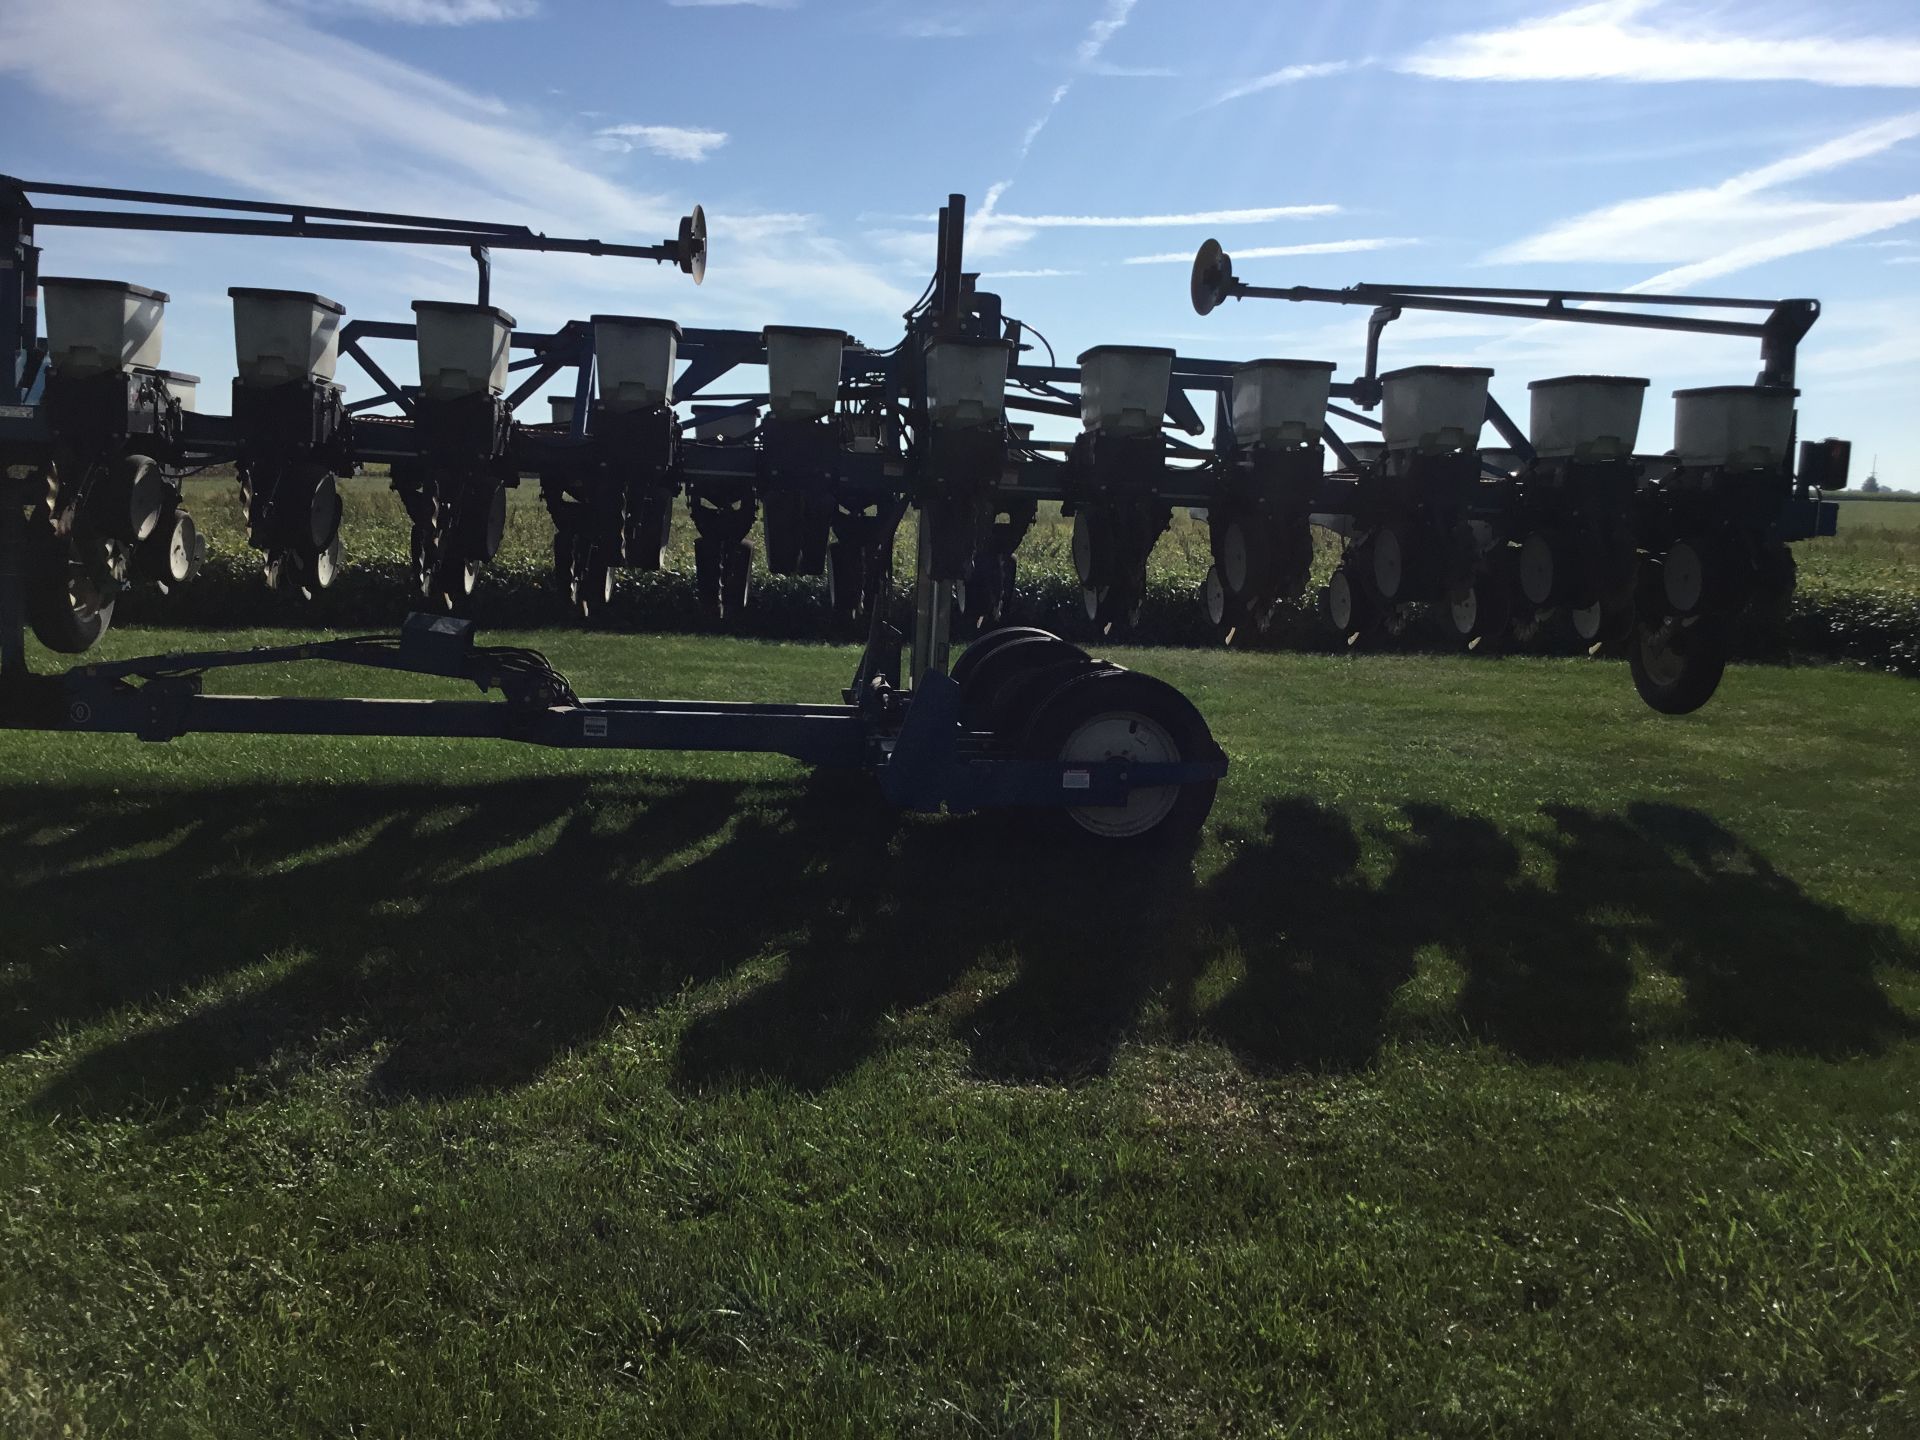 2000 Kinze 3600 12/23, No-Till Coulters, Keeton Seed Firmers, Heavy Duty Down Pressure Springs, - Image 10 of 11